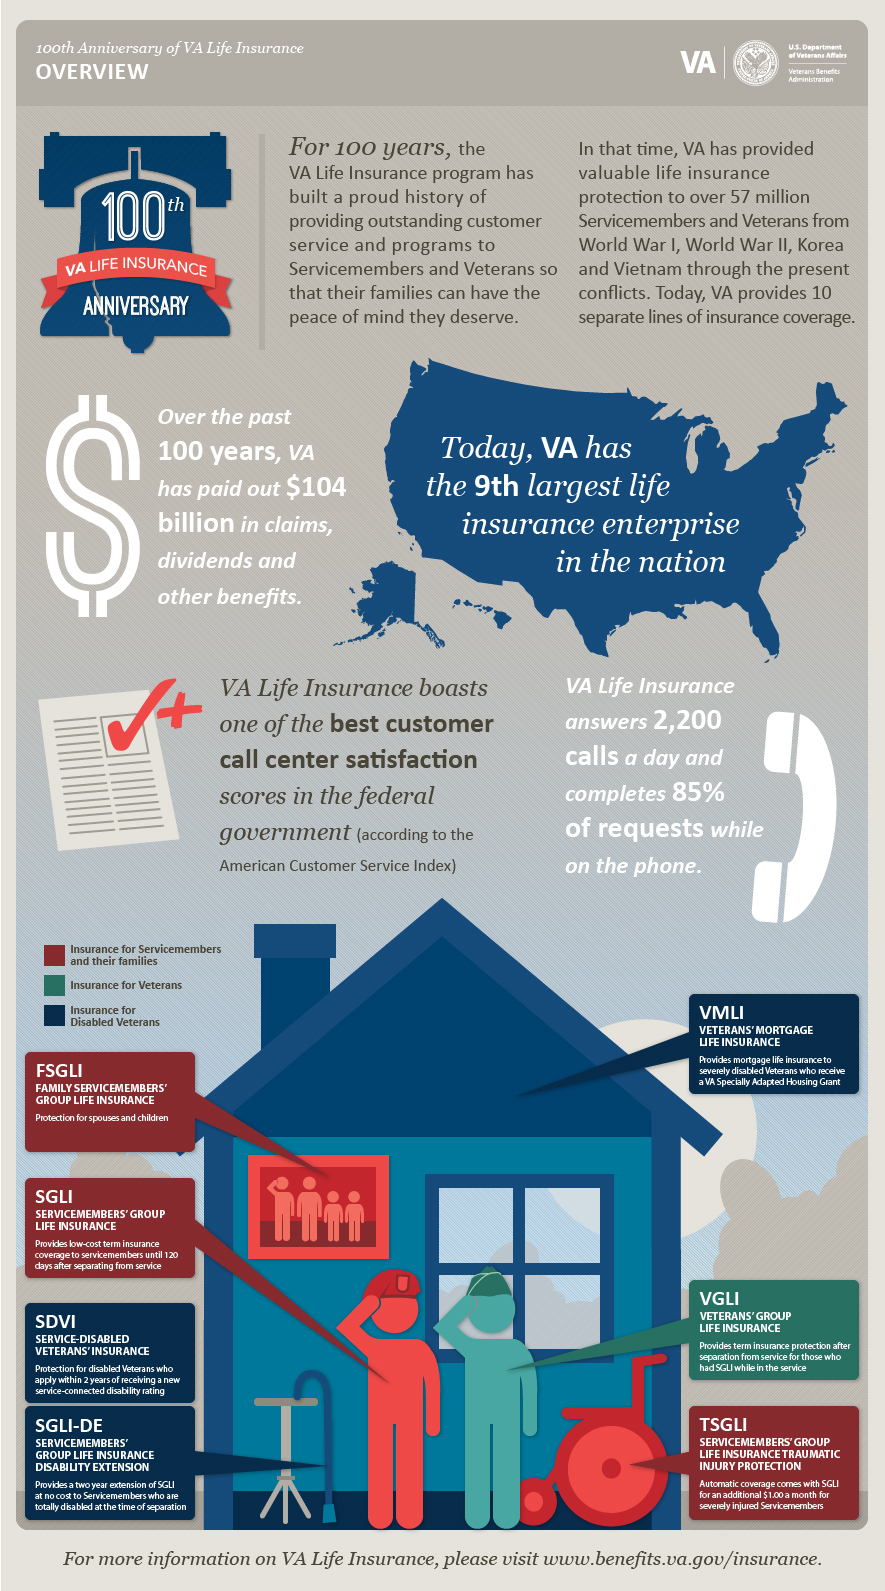 Overview of 100th Anniversary of VA Life Insurance